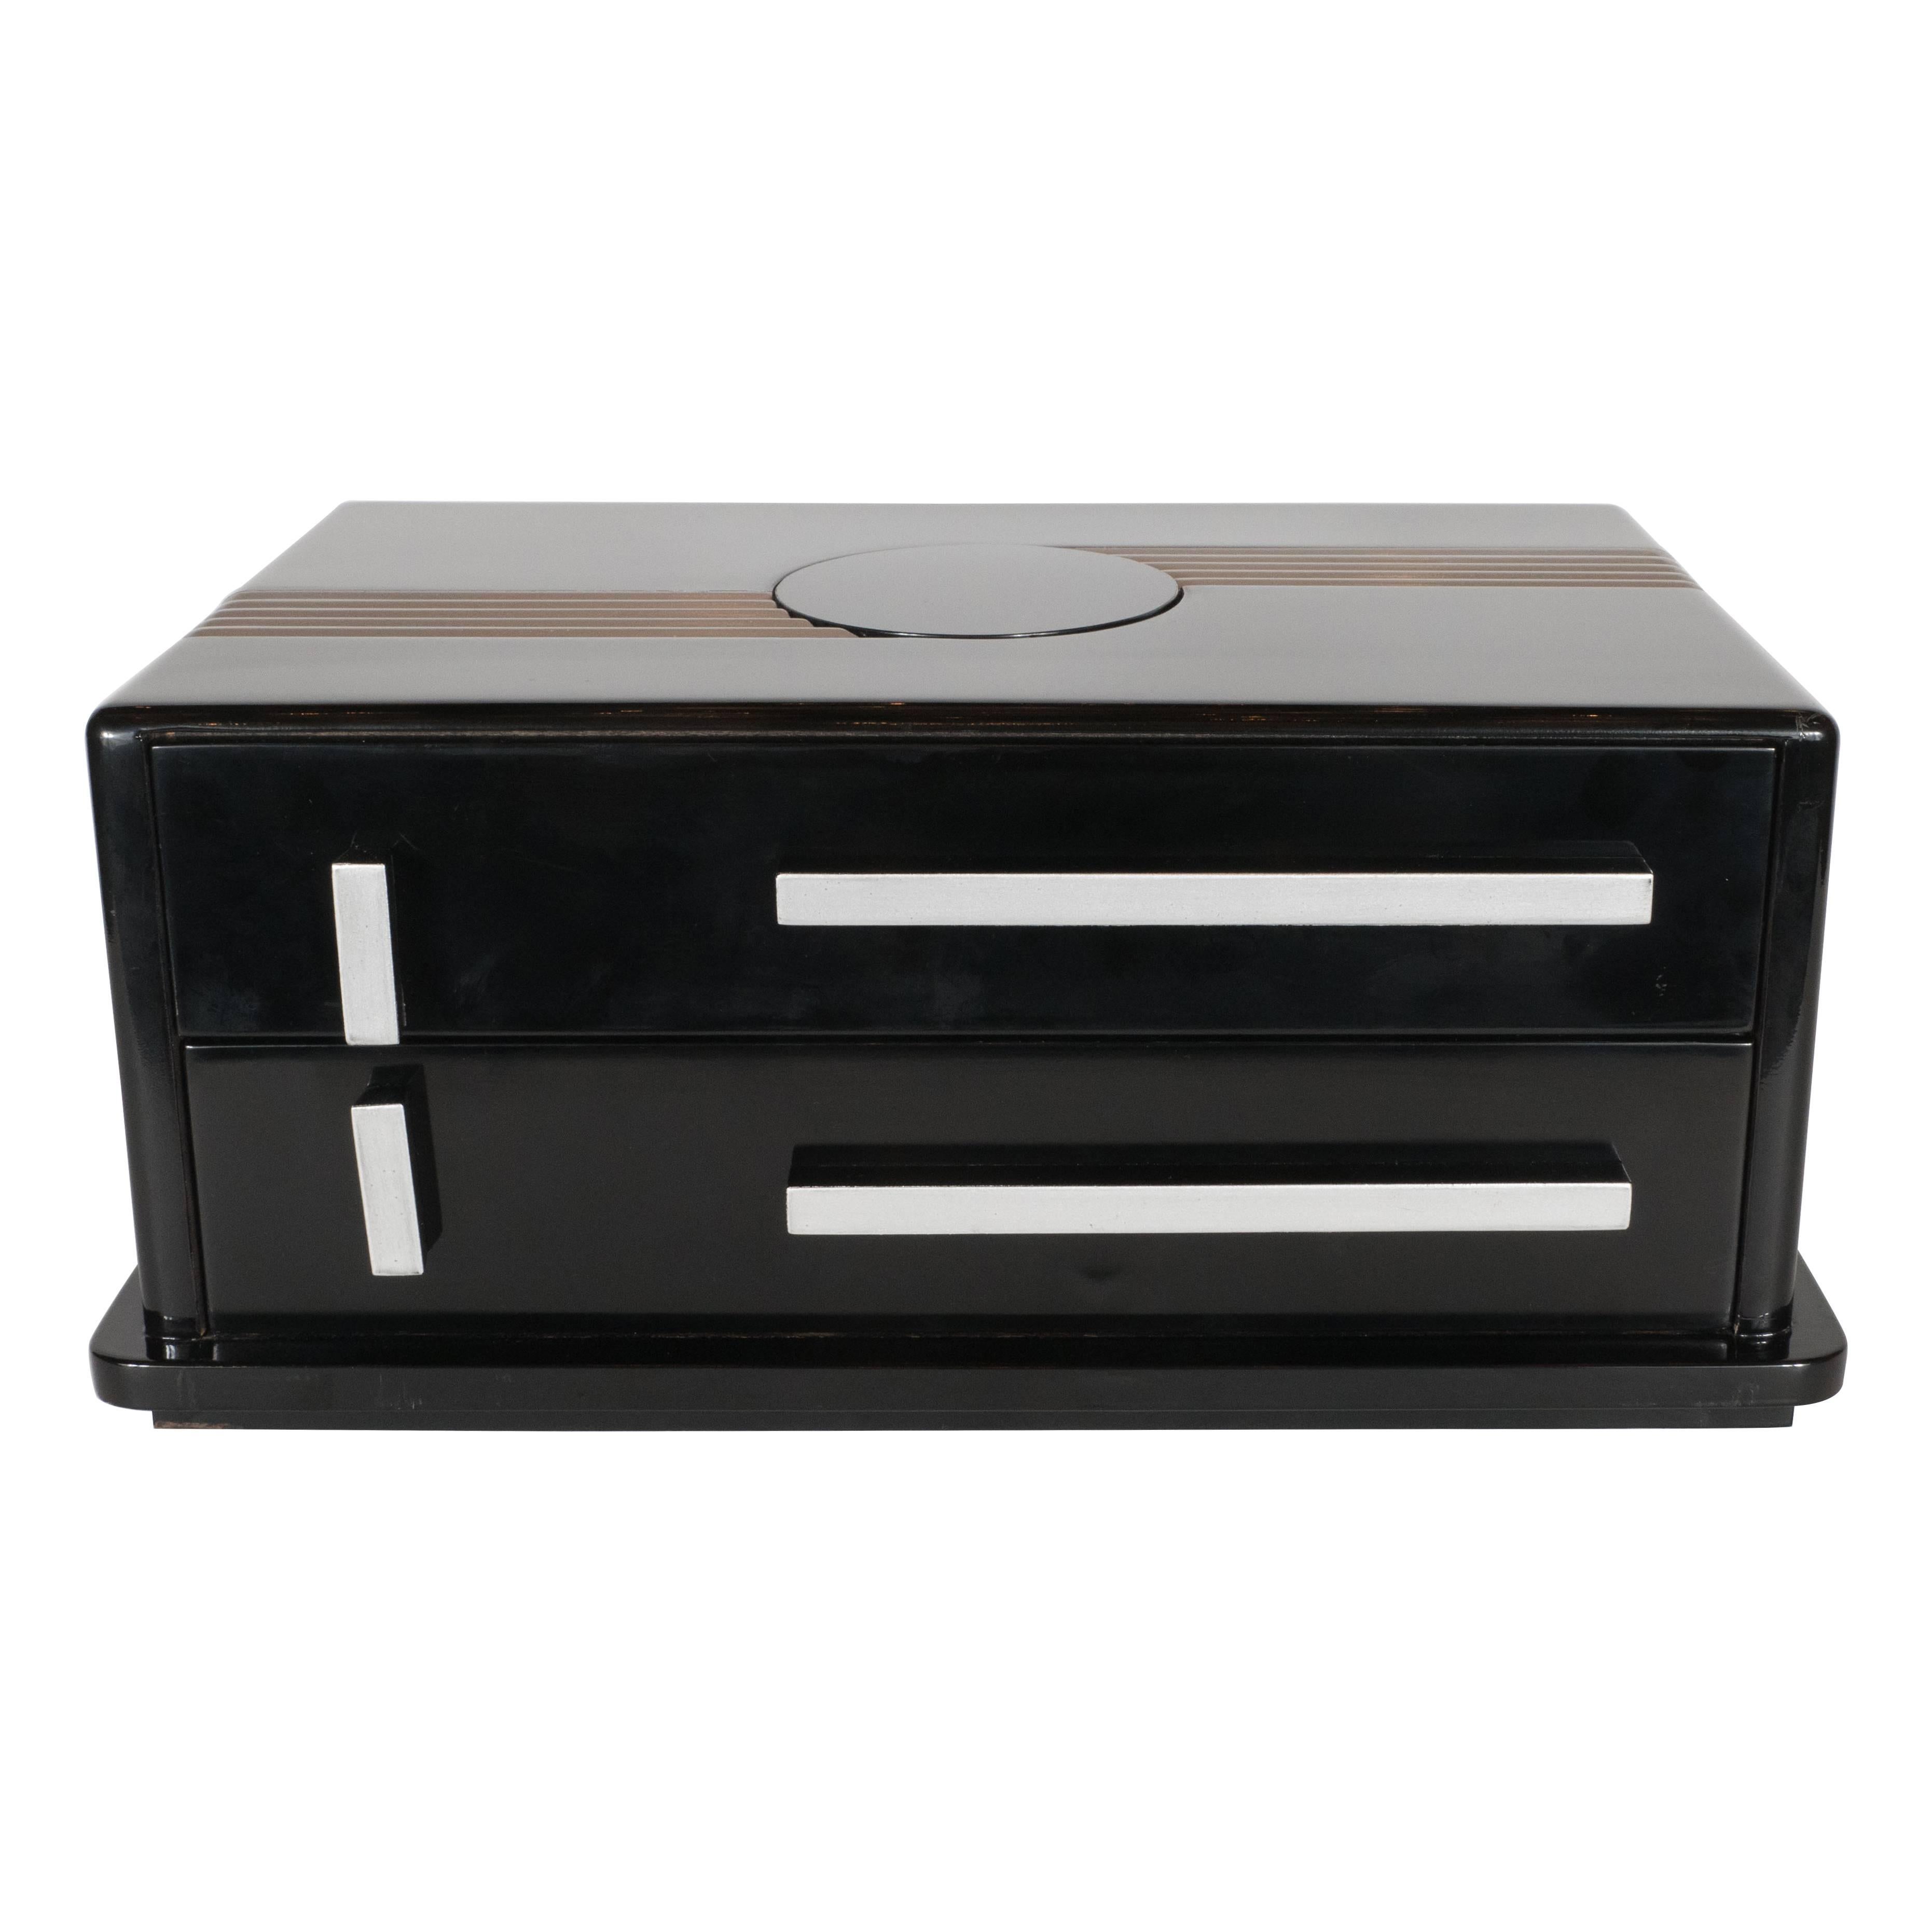 Streamlined Art Deco Jewelry Box in Black Lacquer with White Gold Finishes